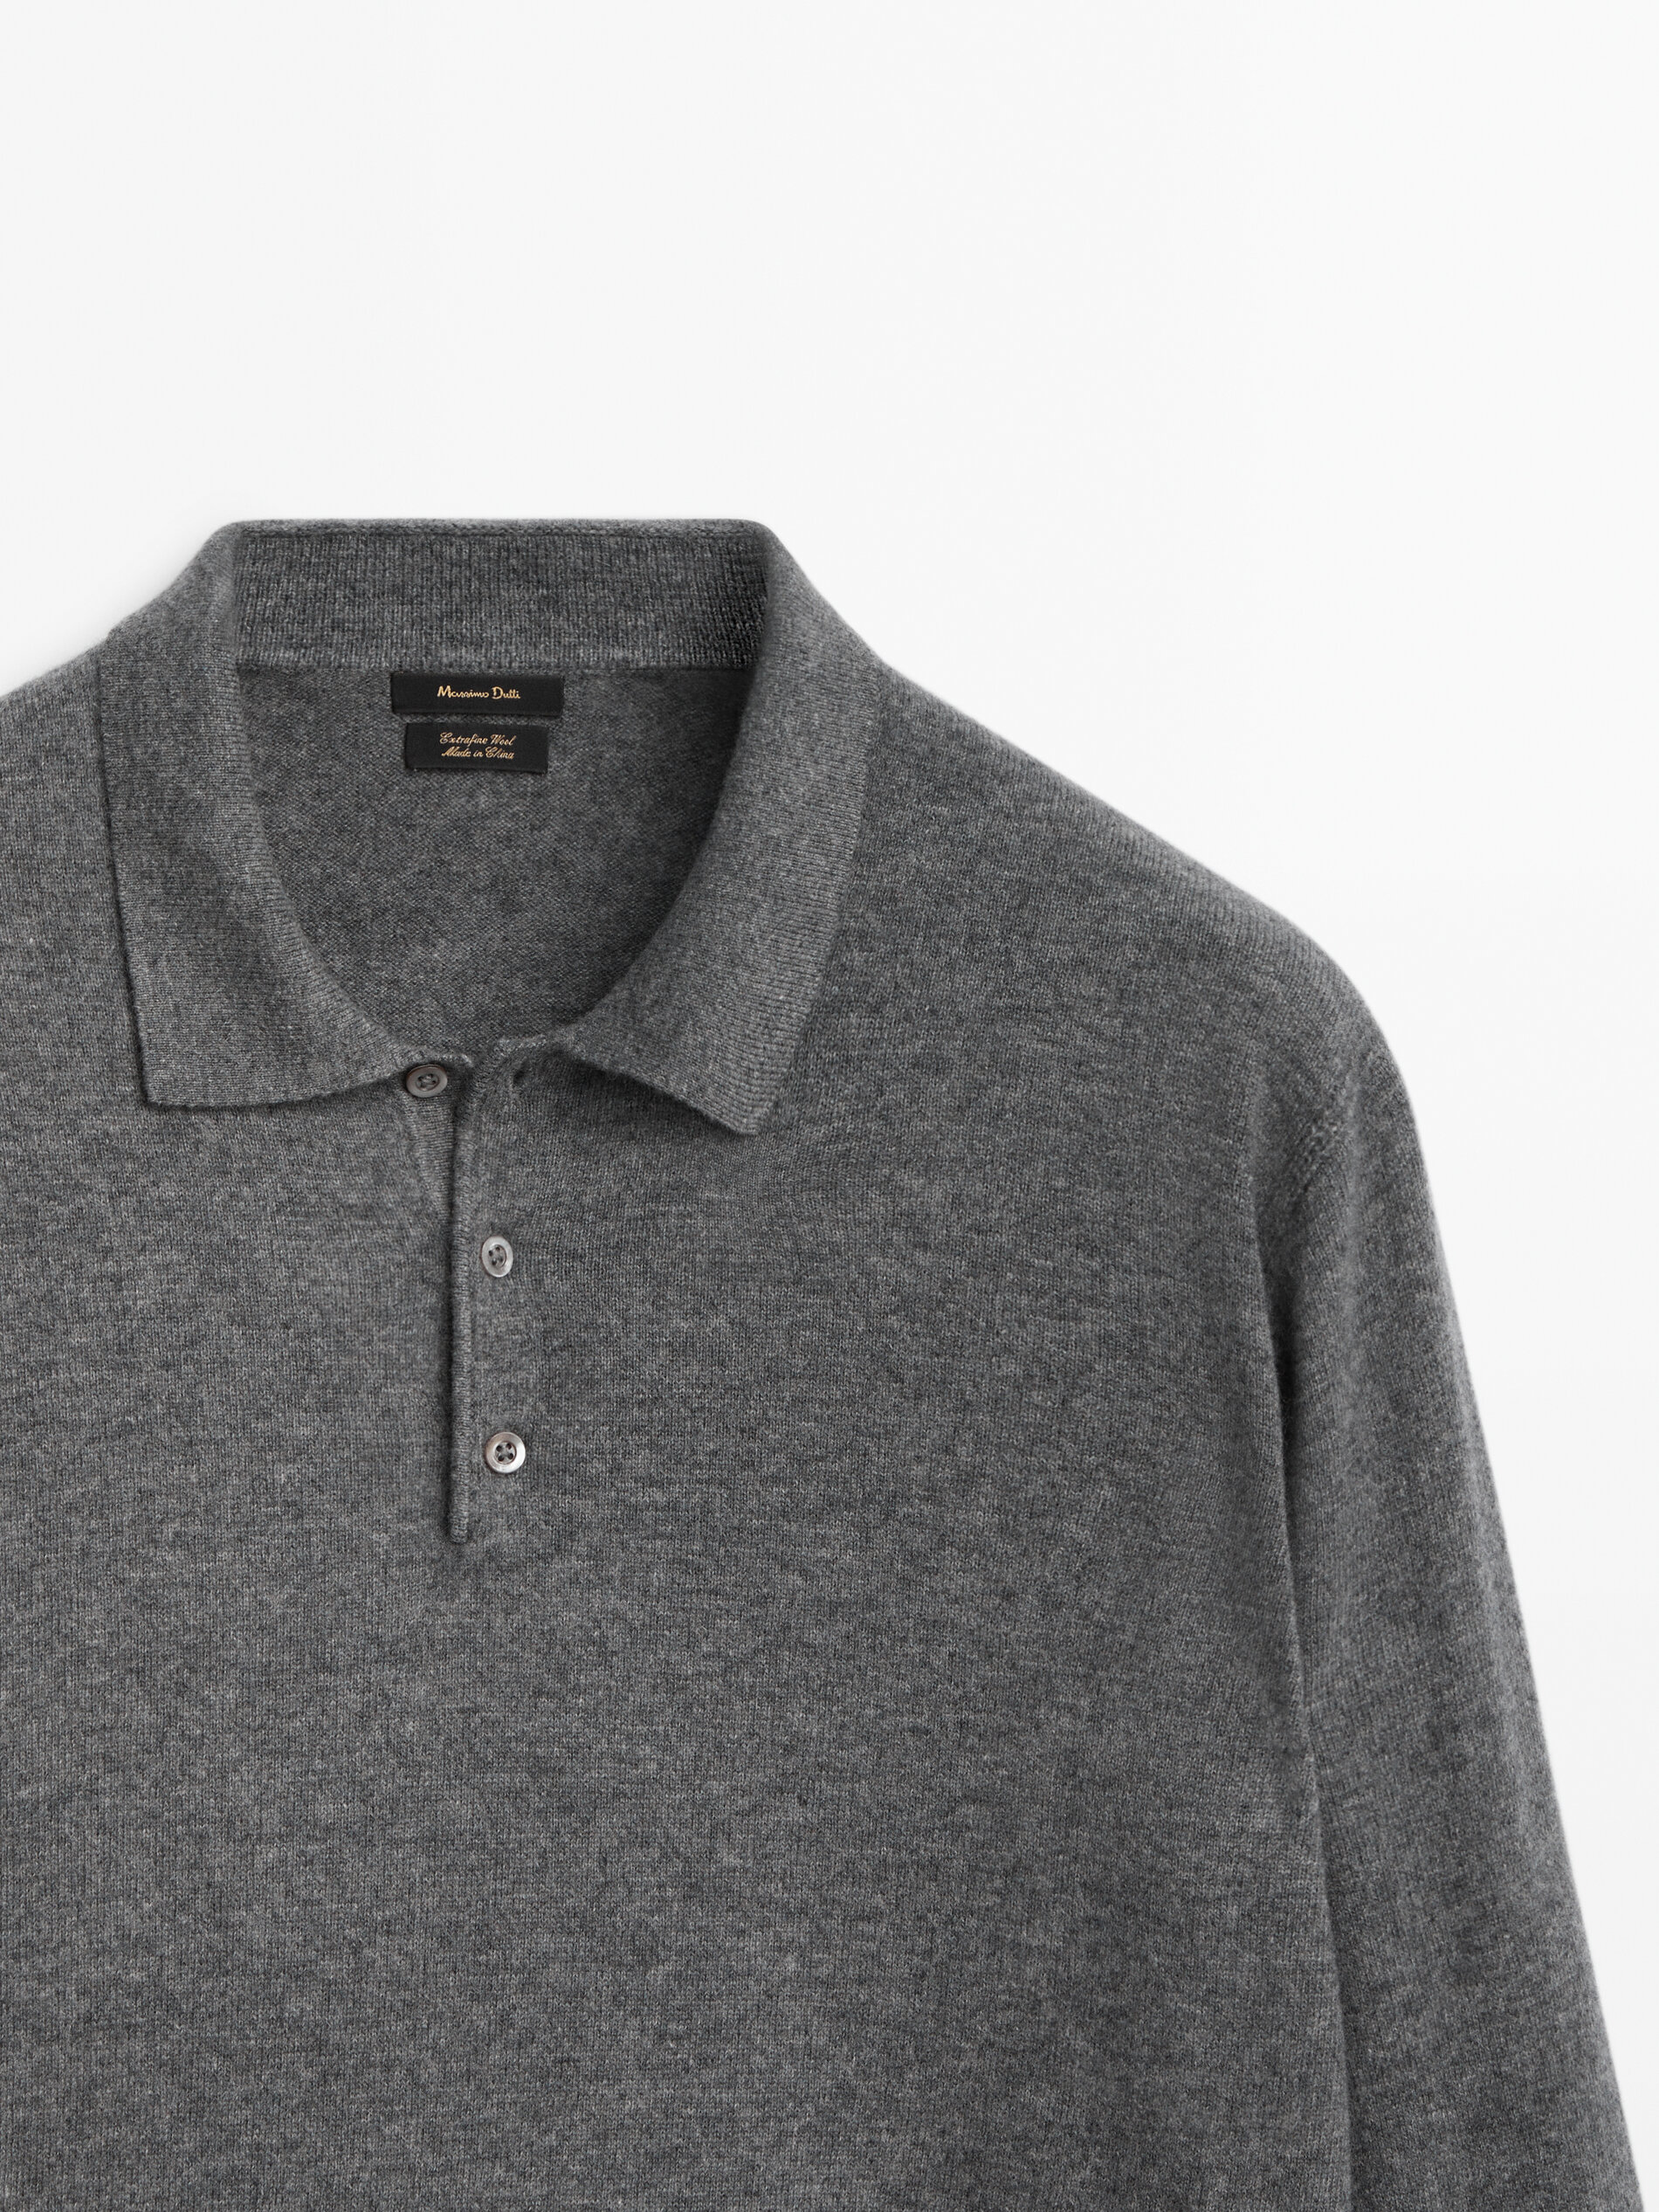 Wool and cashmere blend knit polo sweater - Massimo Dutti